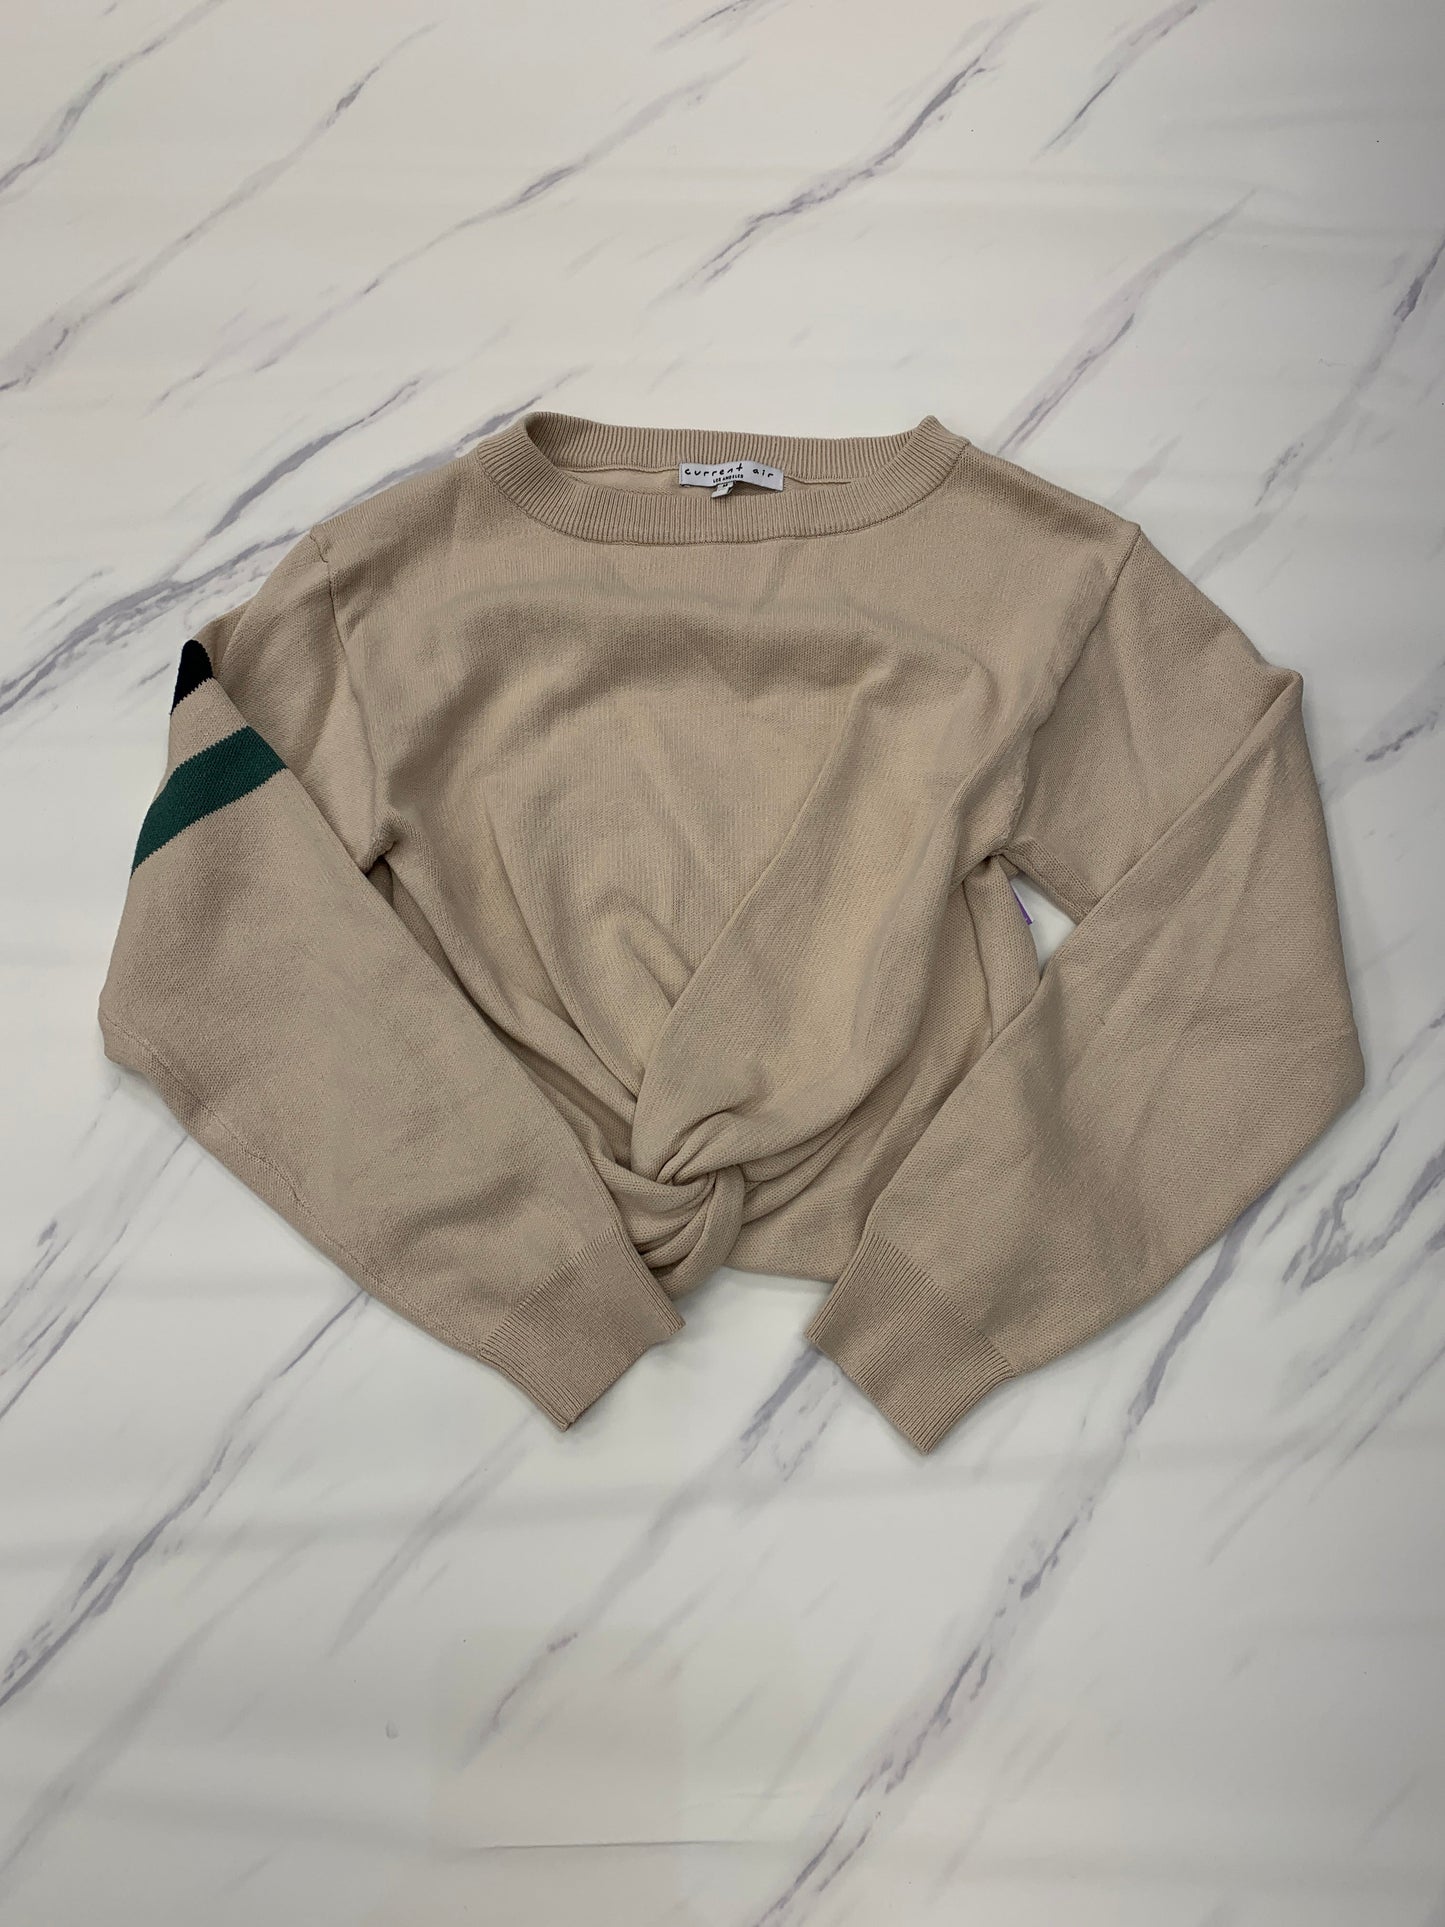 Sweater By Current Air  Size: M